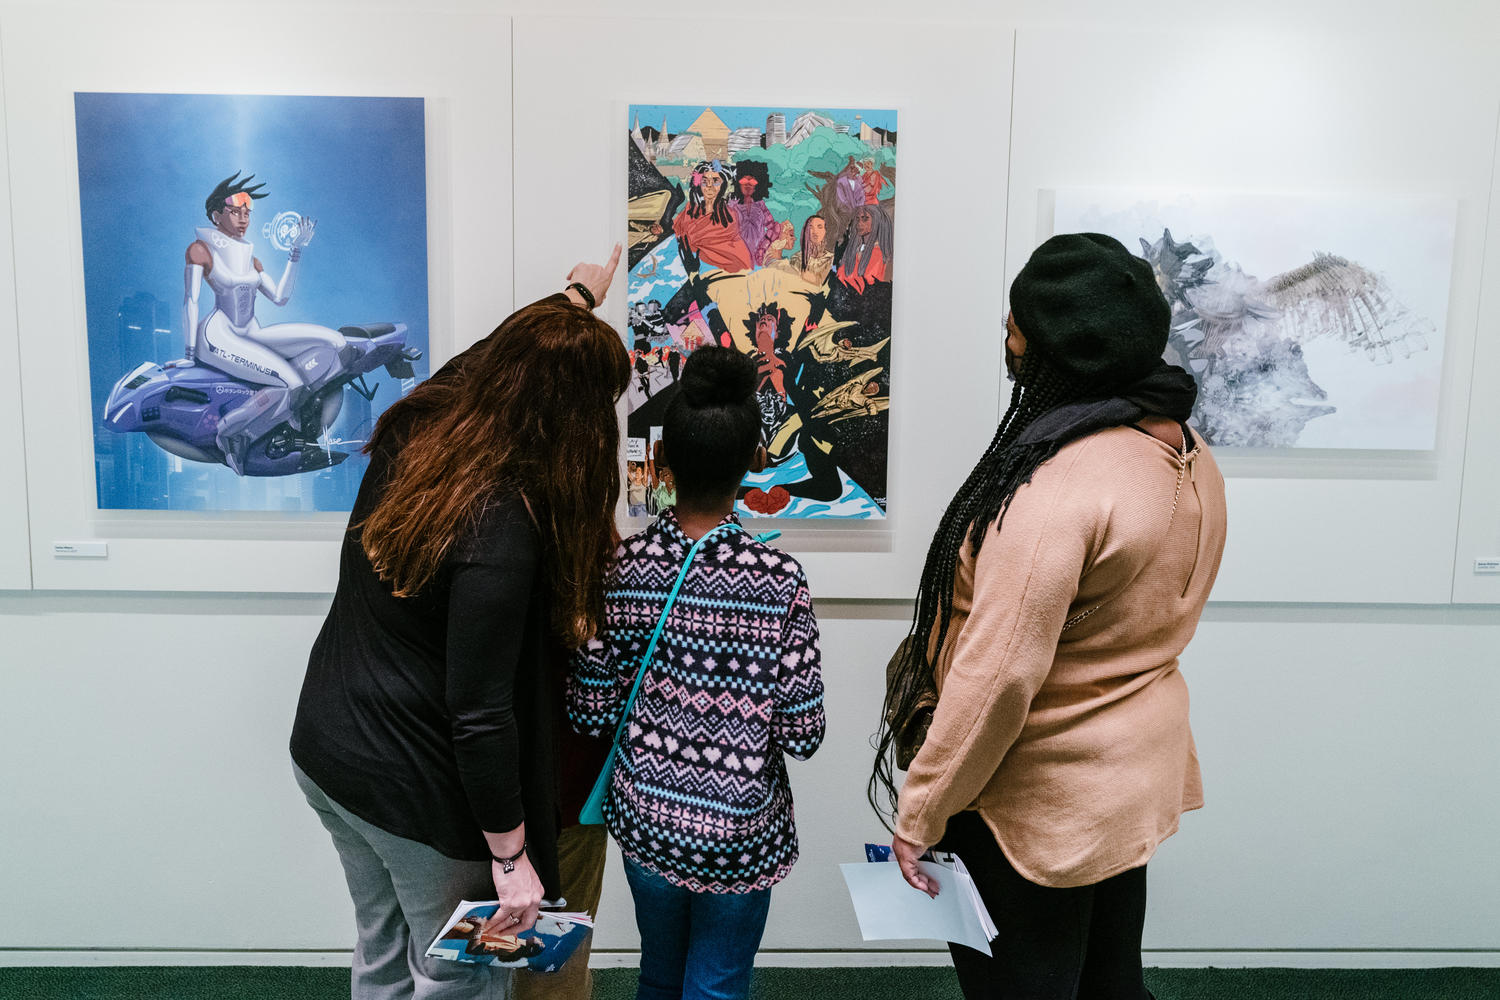 Visitors at an Afrofuturism exhibit at Carnegie Hall's Zankel Hall Gallery, in Feb. 2022 in New York City.
                      
                      Artwork (left to right):
                      1. Terminus 2 by James Mason
                      2. All Possible Future by Alan Saint Clark
                      3. Atoms of an Evening Wing by Quentin VerCetty (Fadi Kheir)